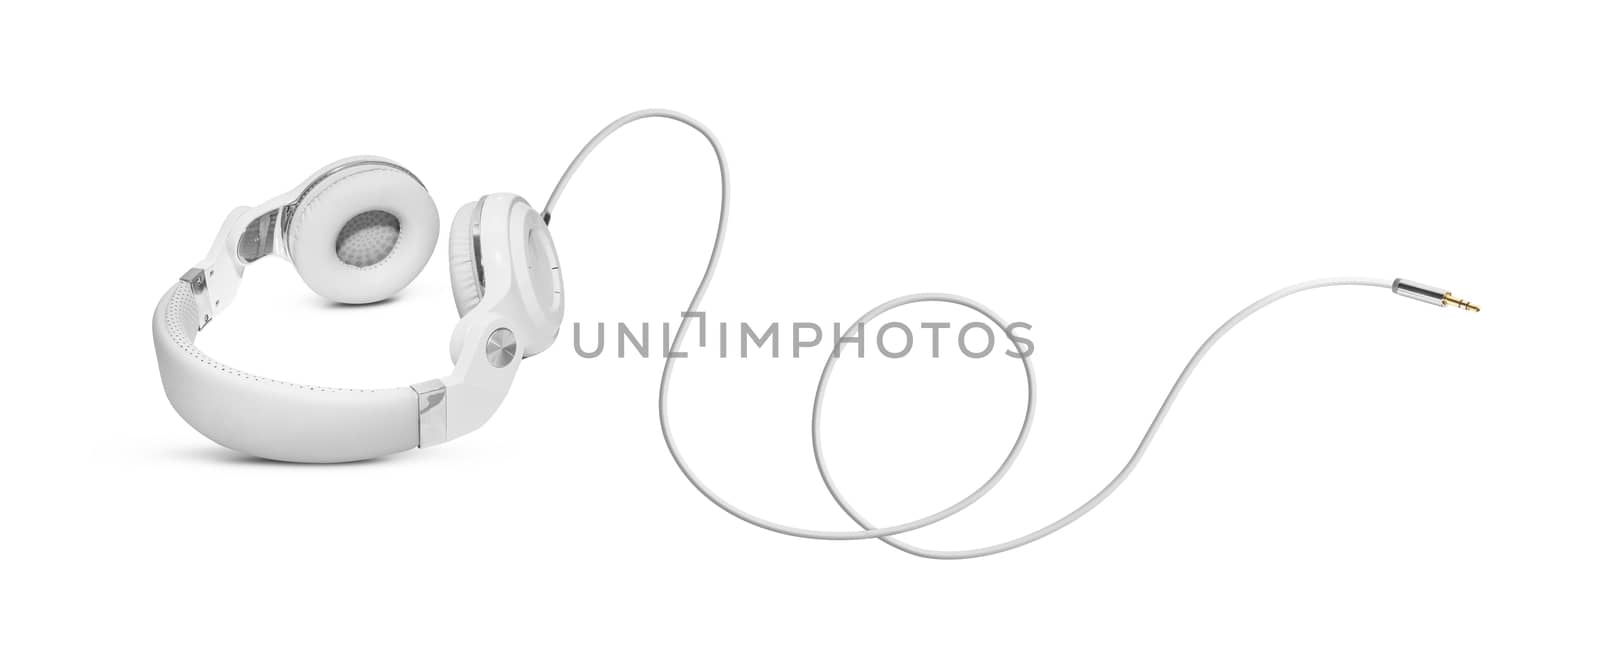 White headphones and Convention Aux cable 3.5 mm. Isolated on white background